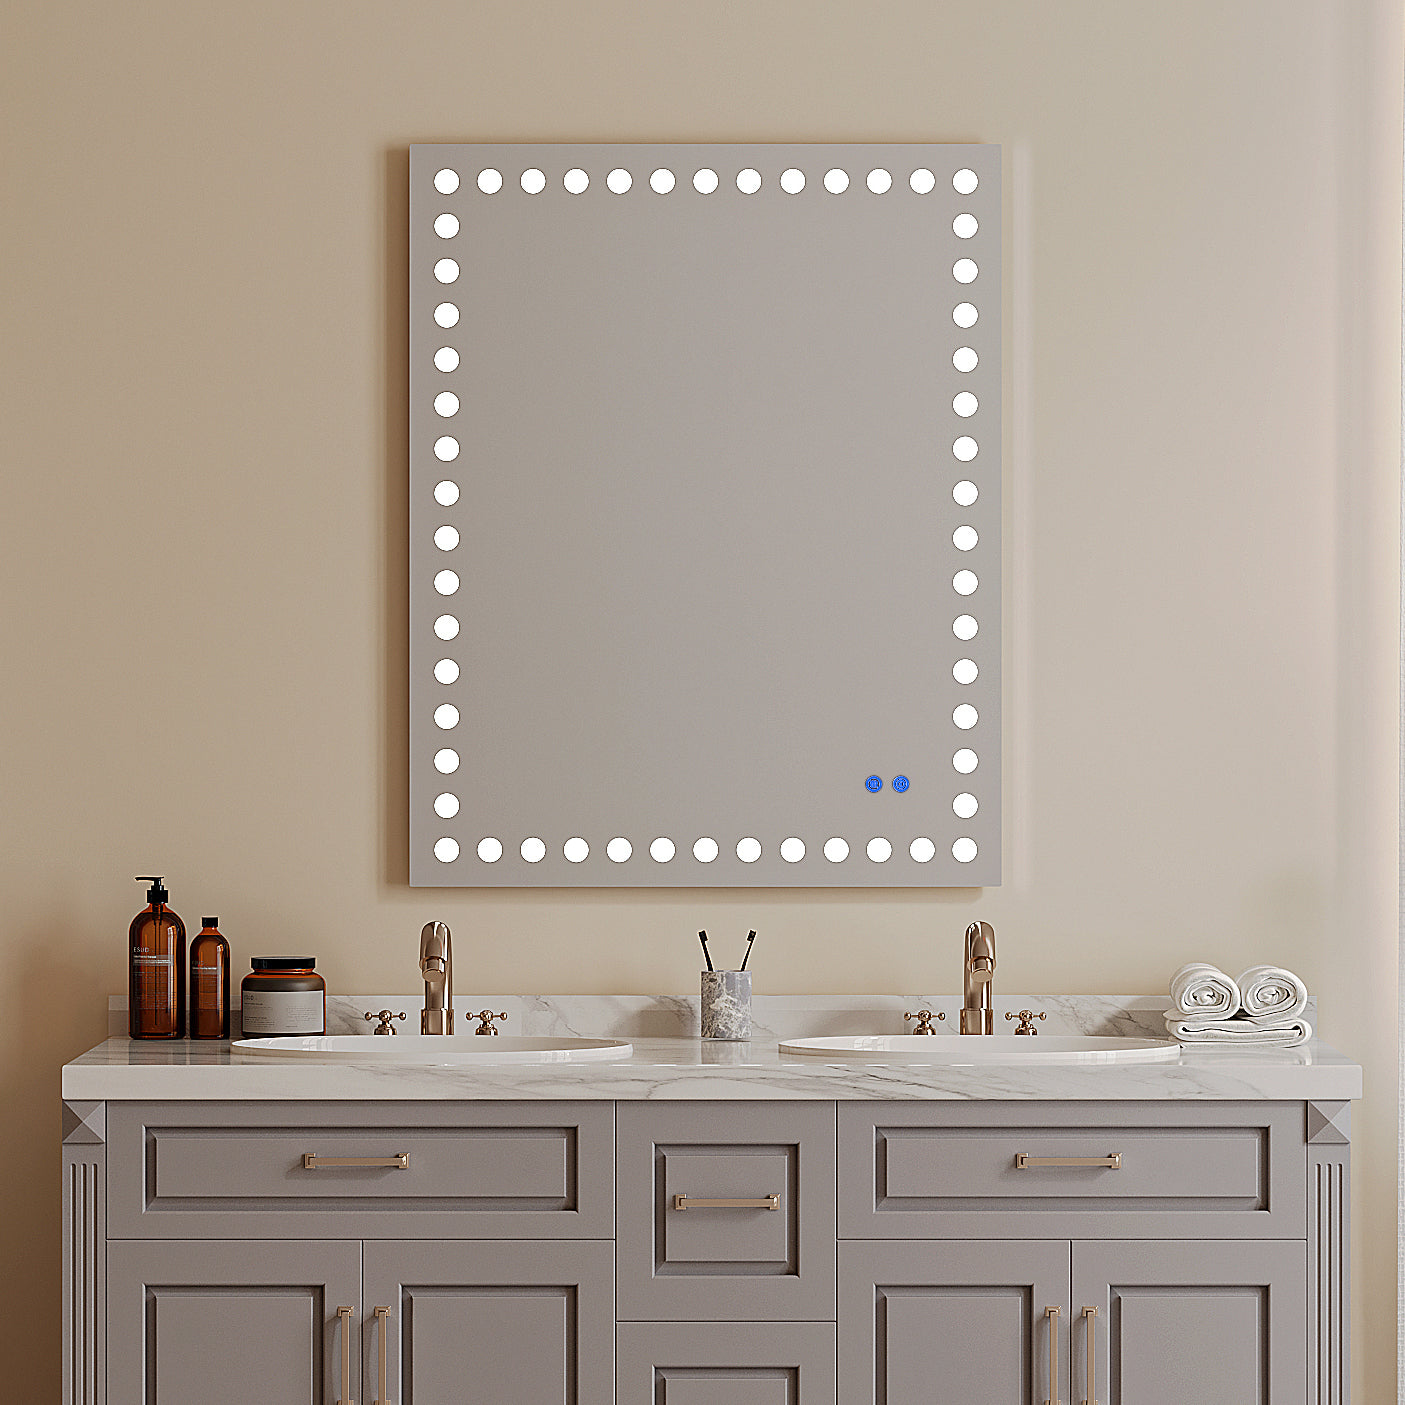 40" X 32" Inch LED Bathroom Wall Mirror with Touch Sensor Switch and Anti-Fog